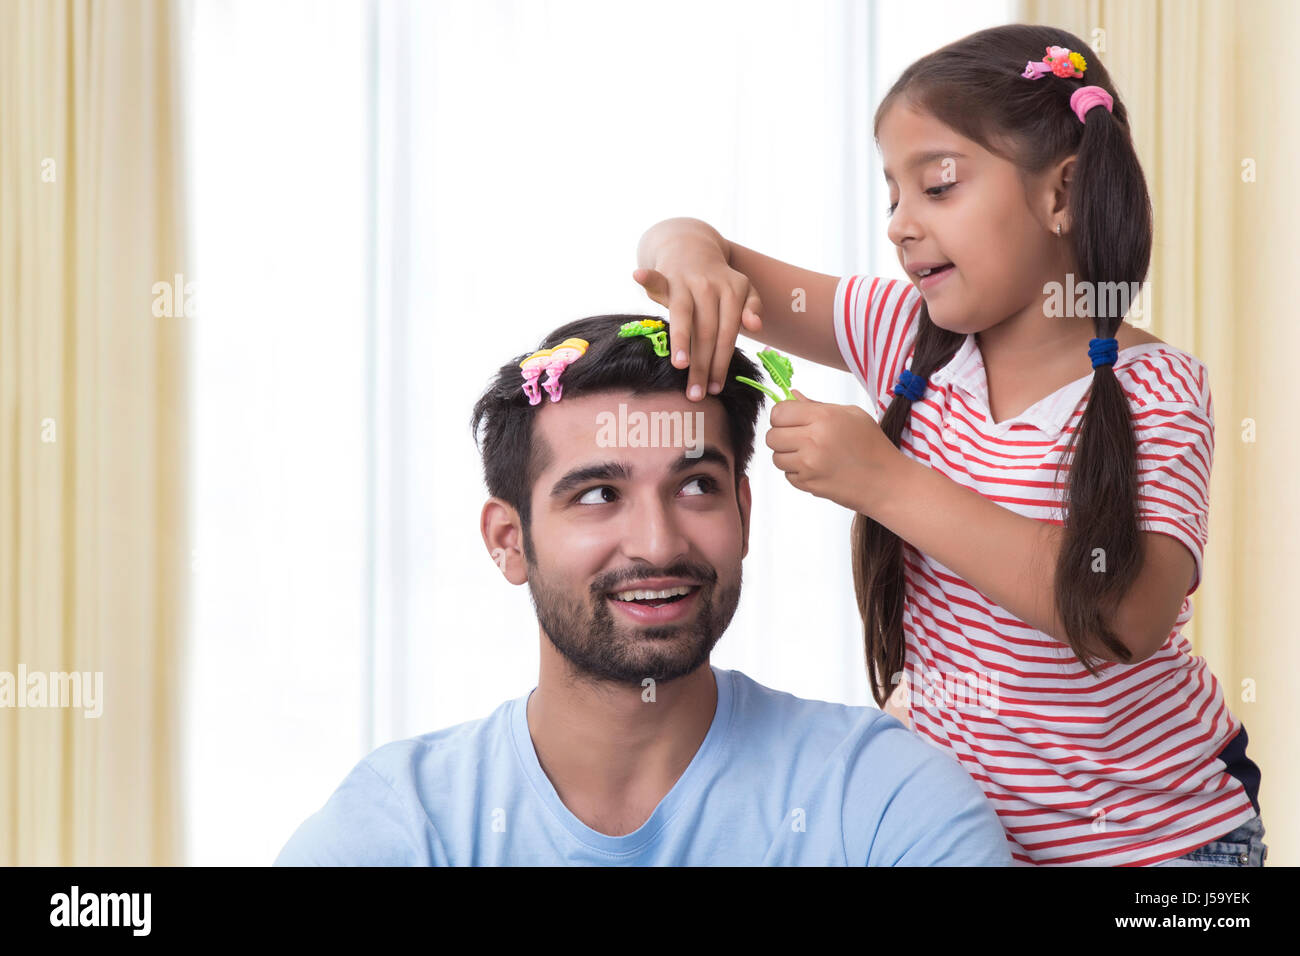 Daughter placing clips in fathers hair and making funny hair style Stock Photo